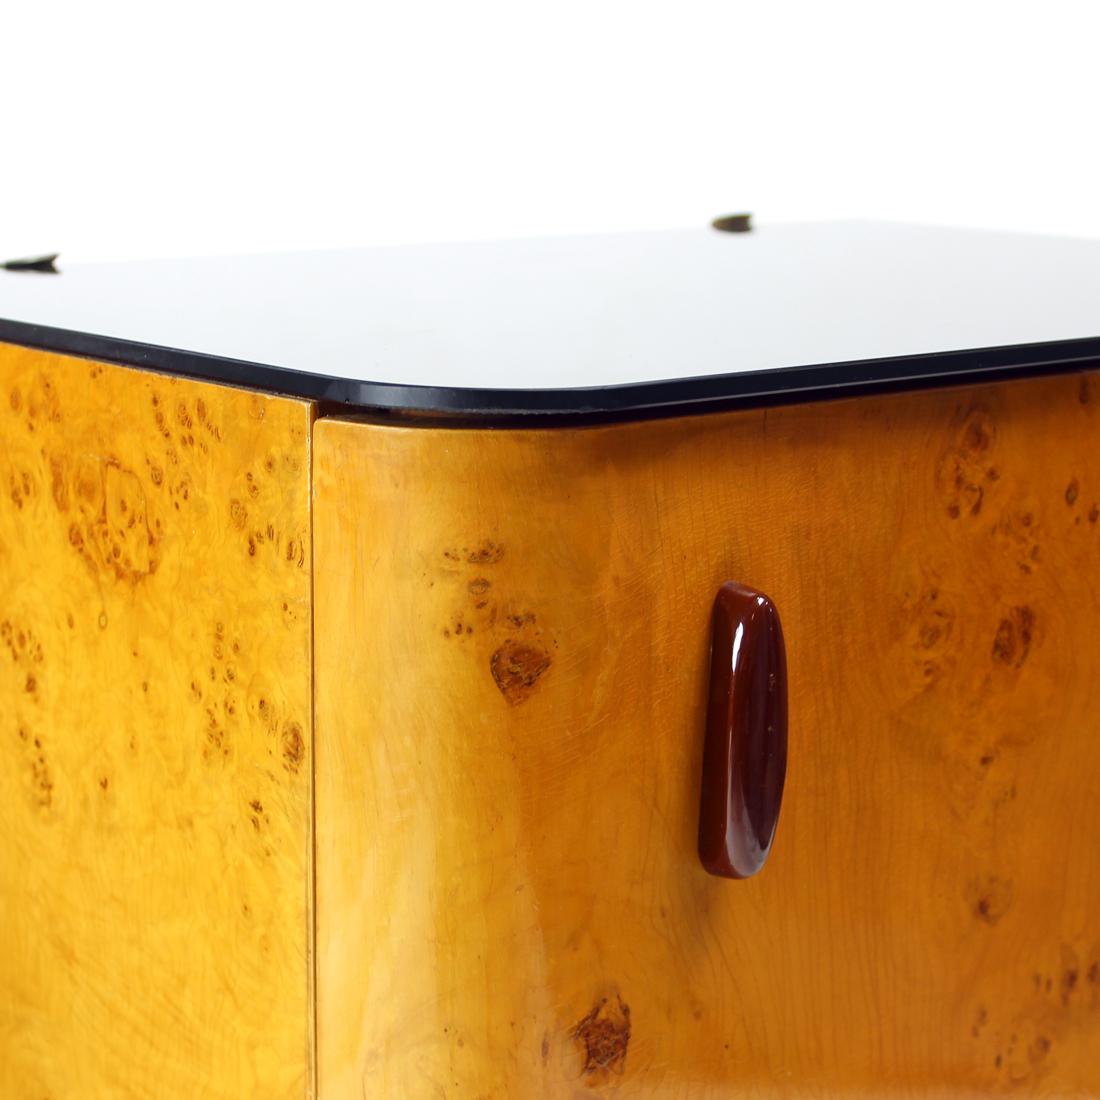 Set of Two Bedside Tables in Wood & Glass, Czechoslovakia, 1940s For Sale 8